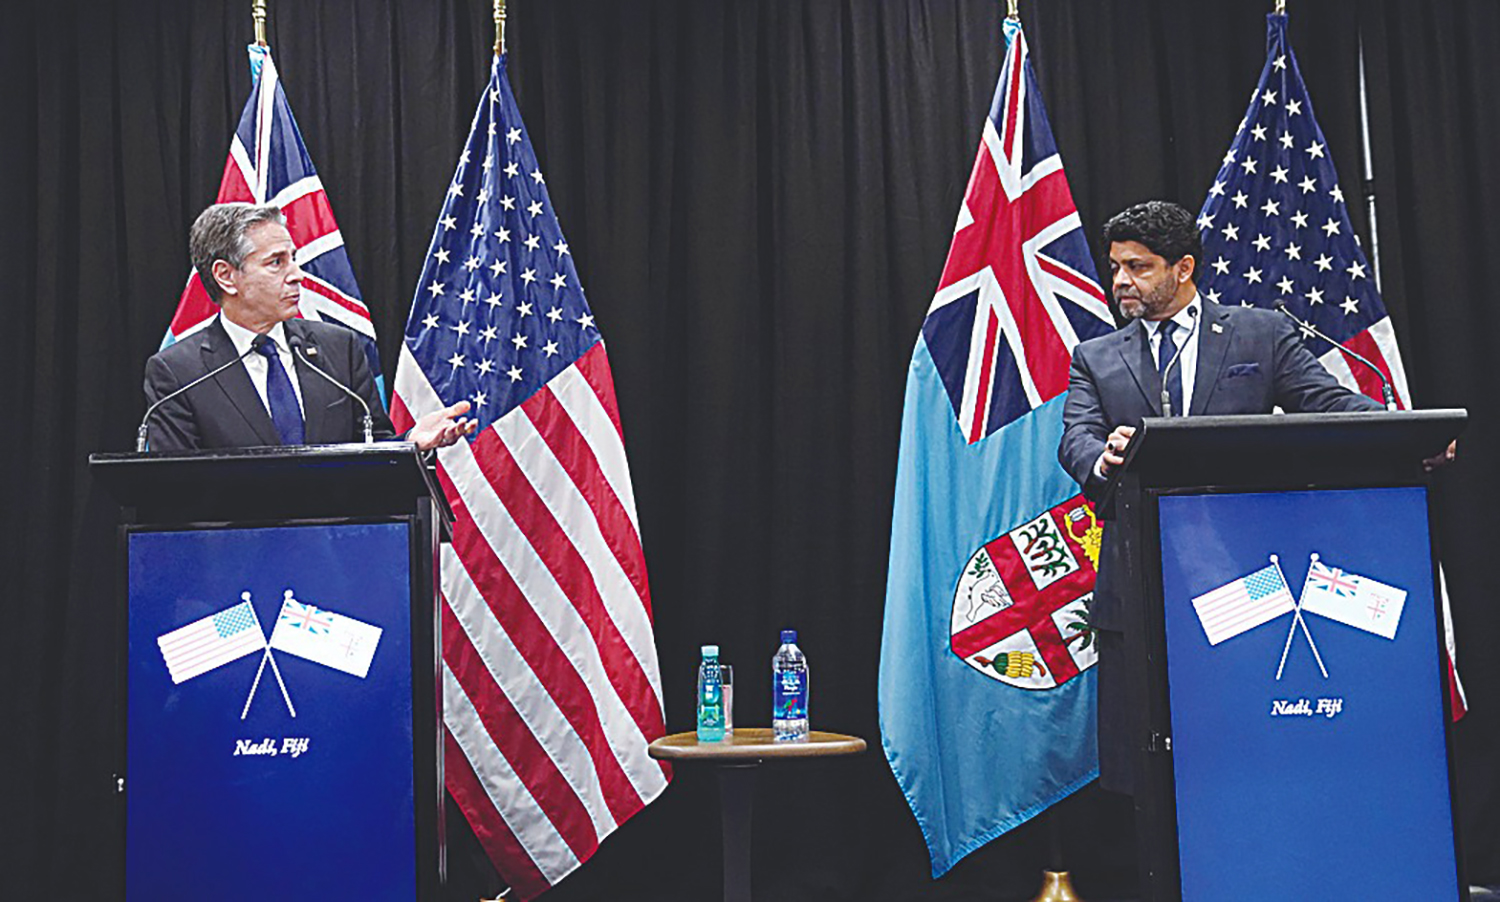 NADI, Fiji: US Secretary of State Antony Blinken (left) takes part in a joint press availability with Fiji's acting Prime Minister Aiyaz Sayed-Khaiyum in Nadi, Fiji yesterday. - AFP